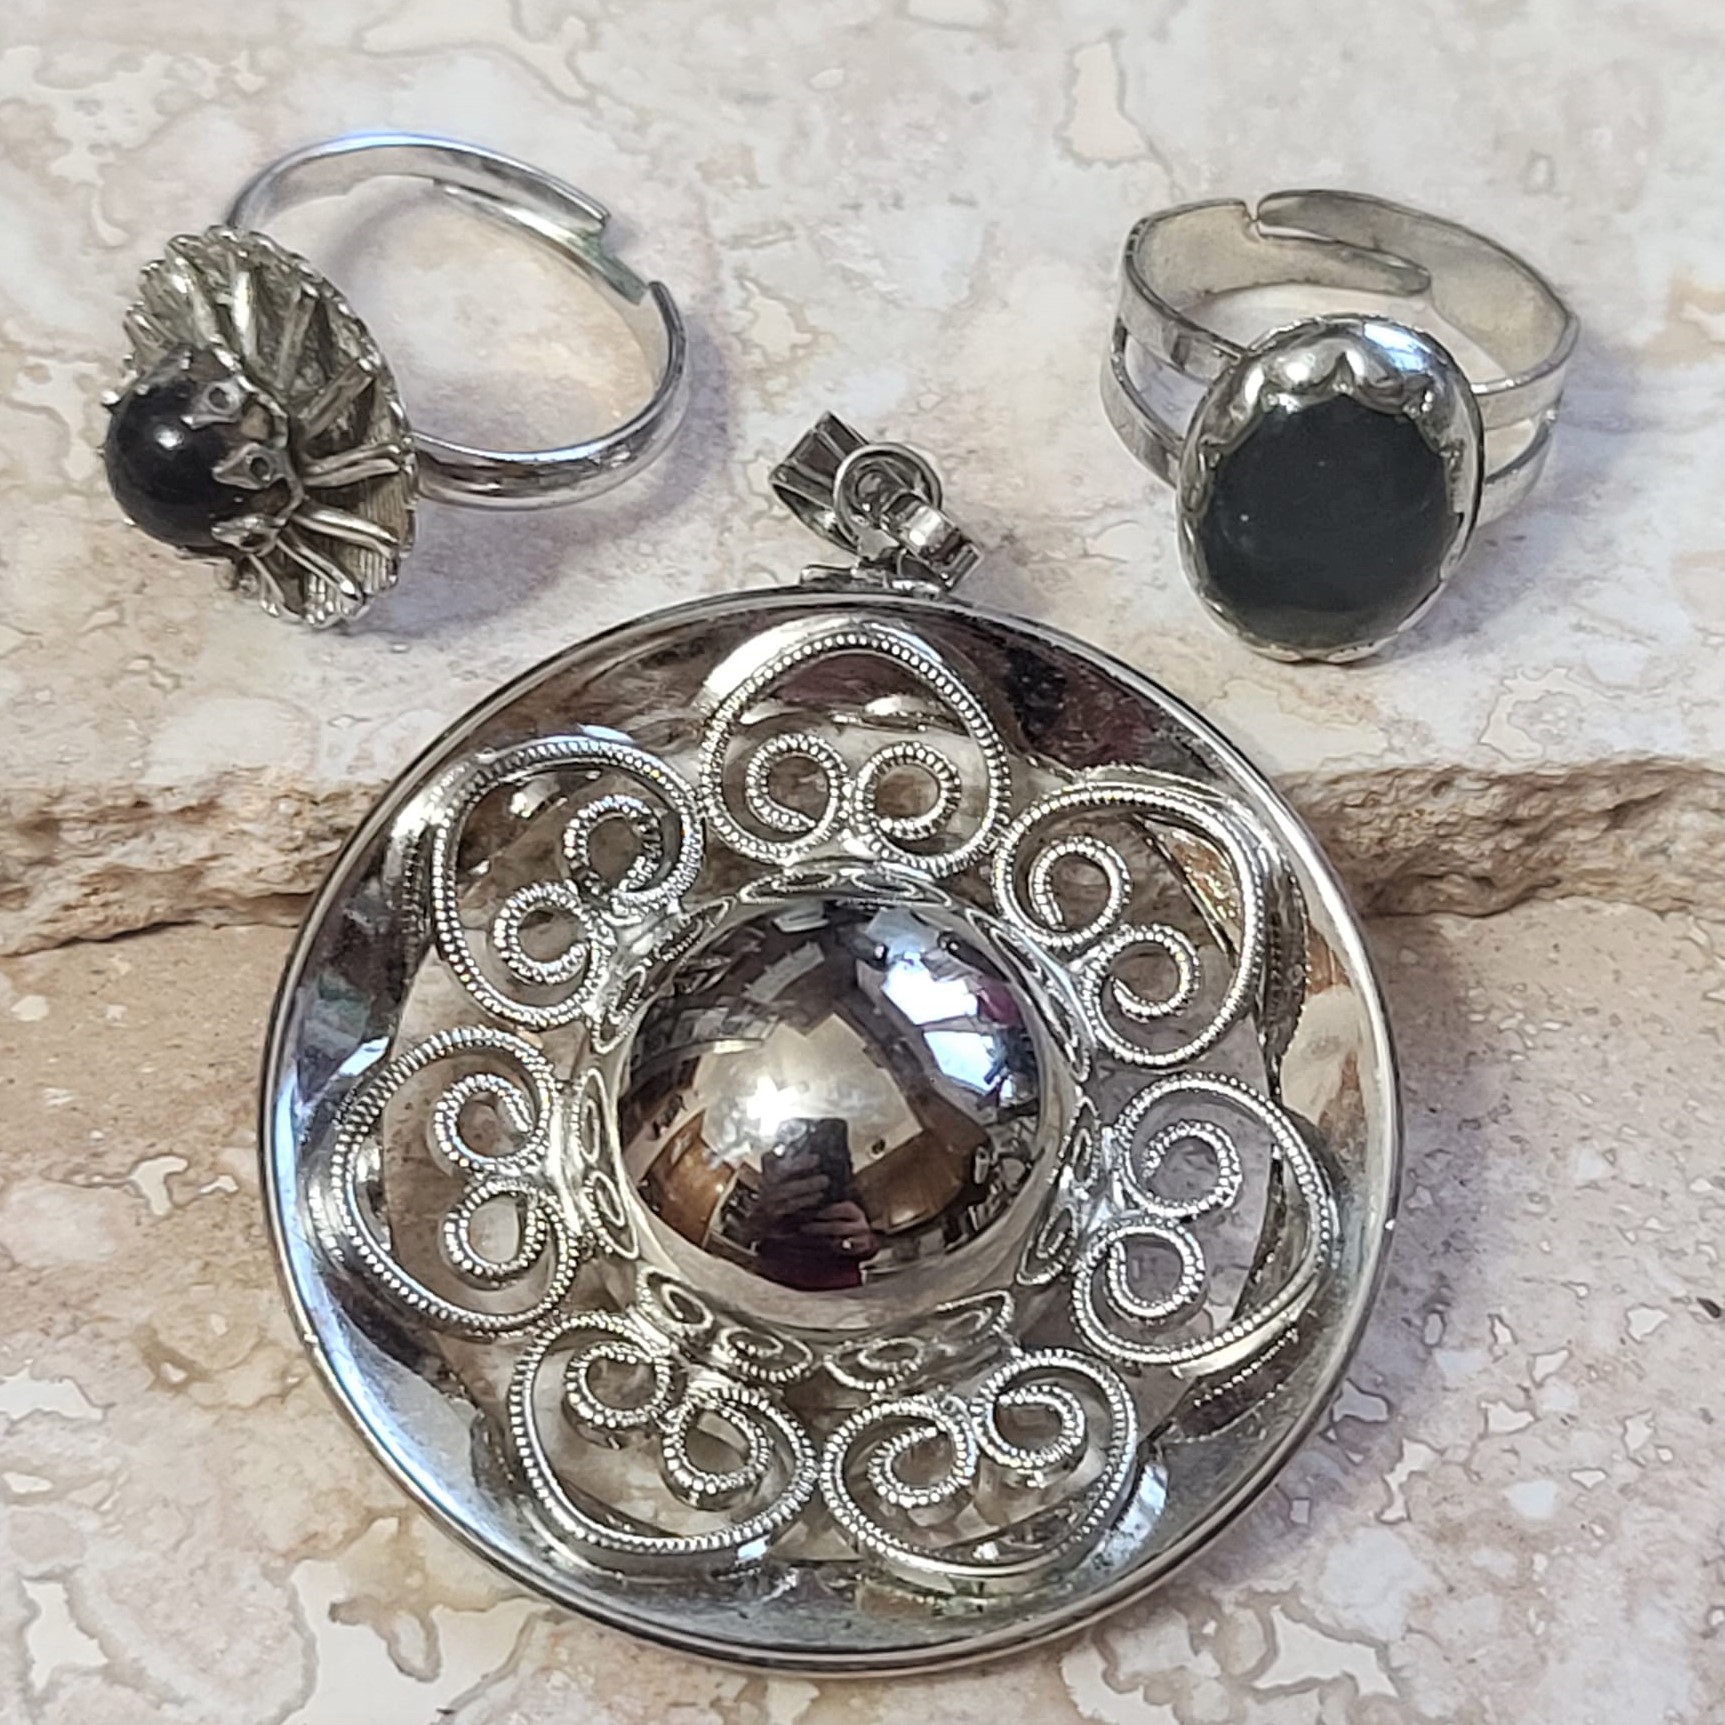 Vintage Silvertone Pendant and 2 Adjustable Rings - Click Image to Close